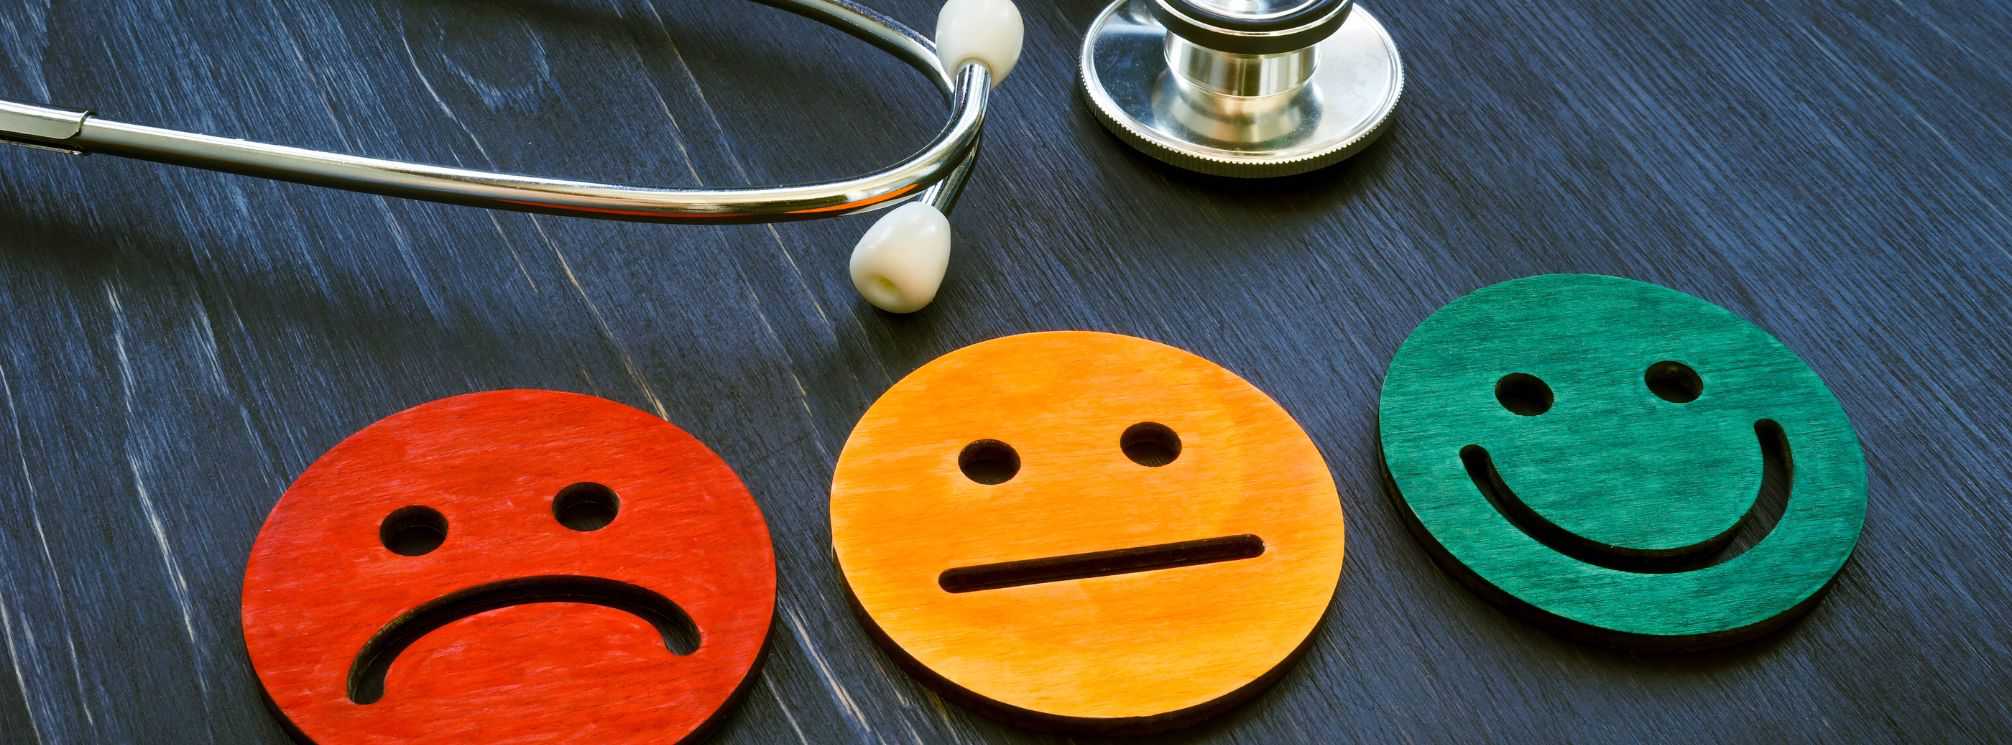 Spectrum of patient experience represented by three wooden smiley faces, one a red frown, the middle a yellow neutral face, and the right one a green smiley face. A stethoscope is on the same table by the smiley faces.